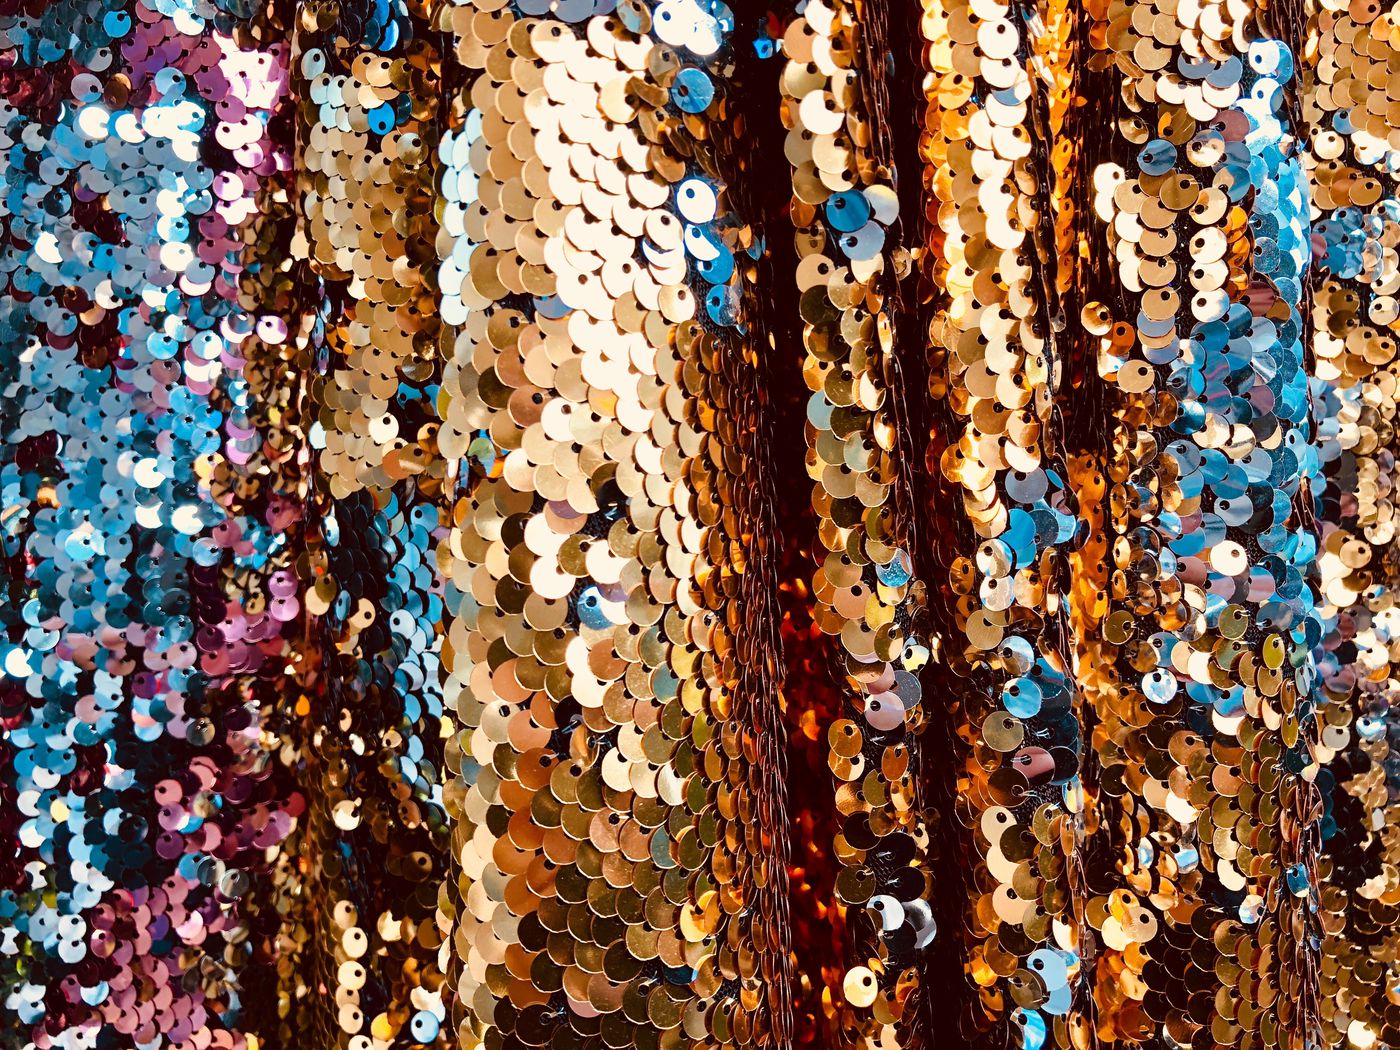 Flip sequins are the weird, glitzy fabric that kids can’t get enough of.